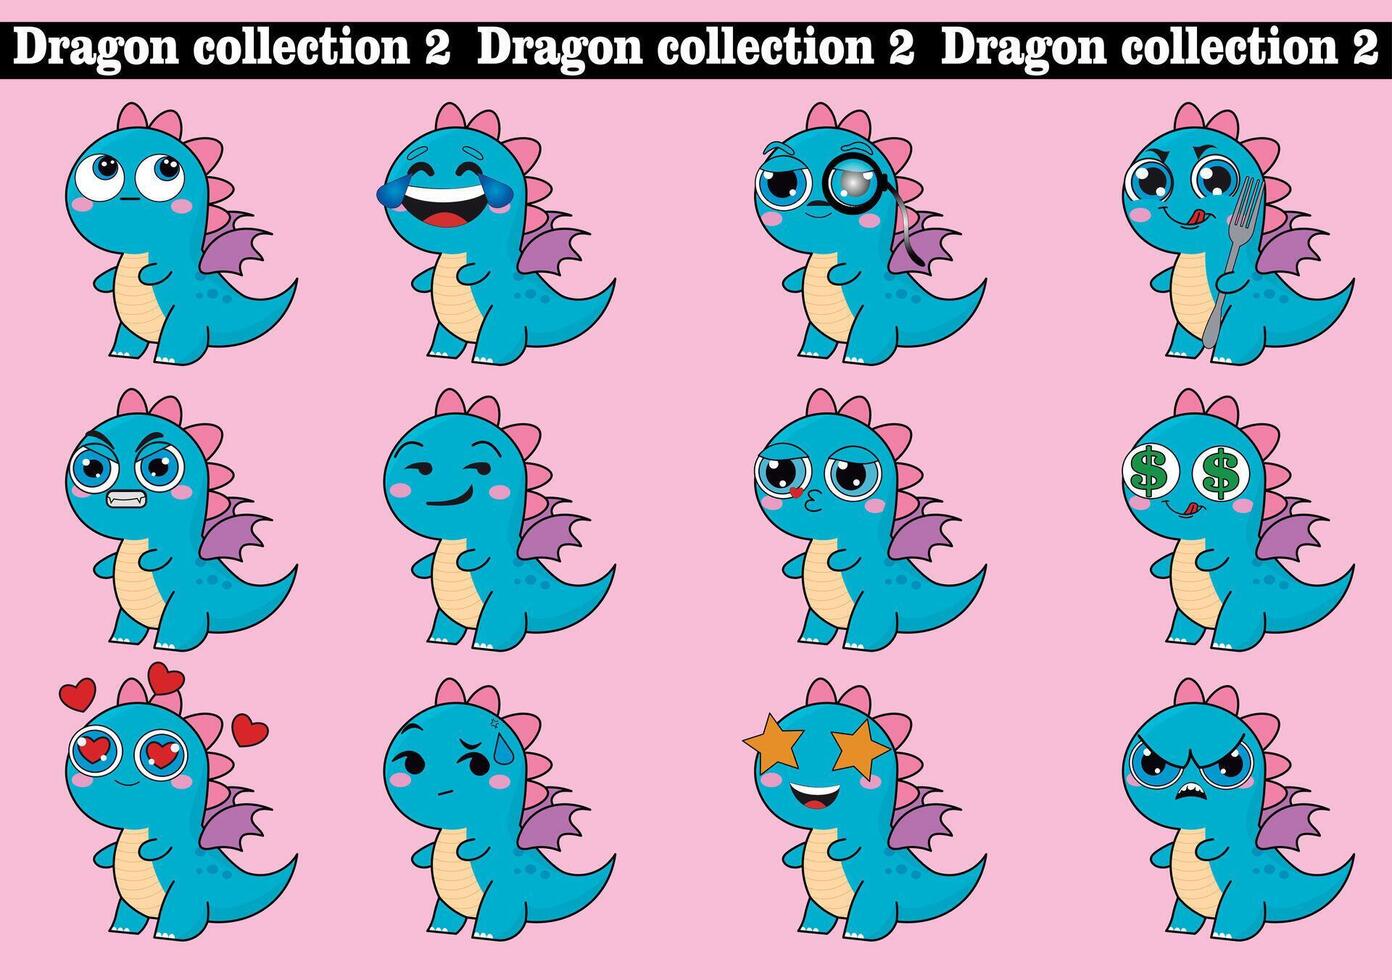 Cute dragon illustration in childish theme and colors, vector for backgrounds